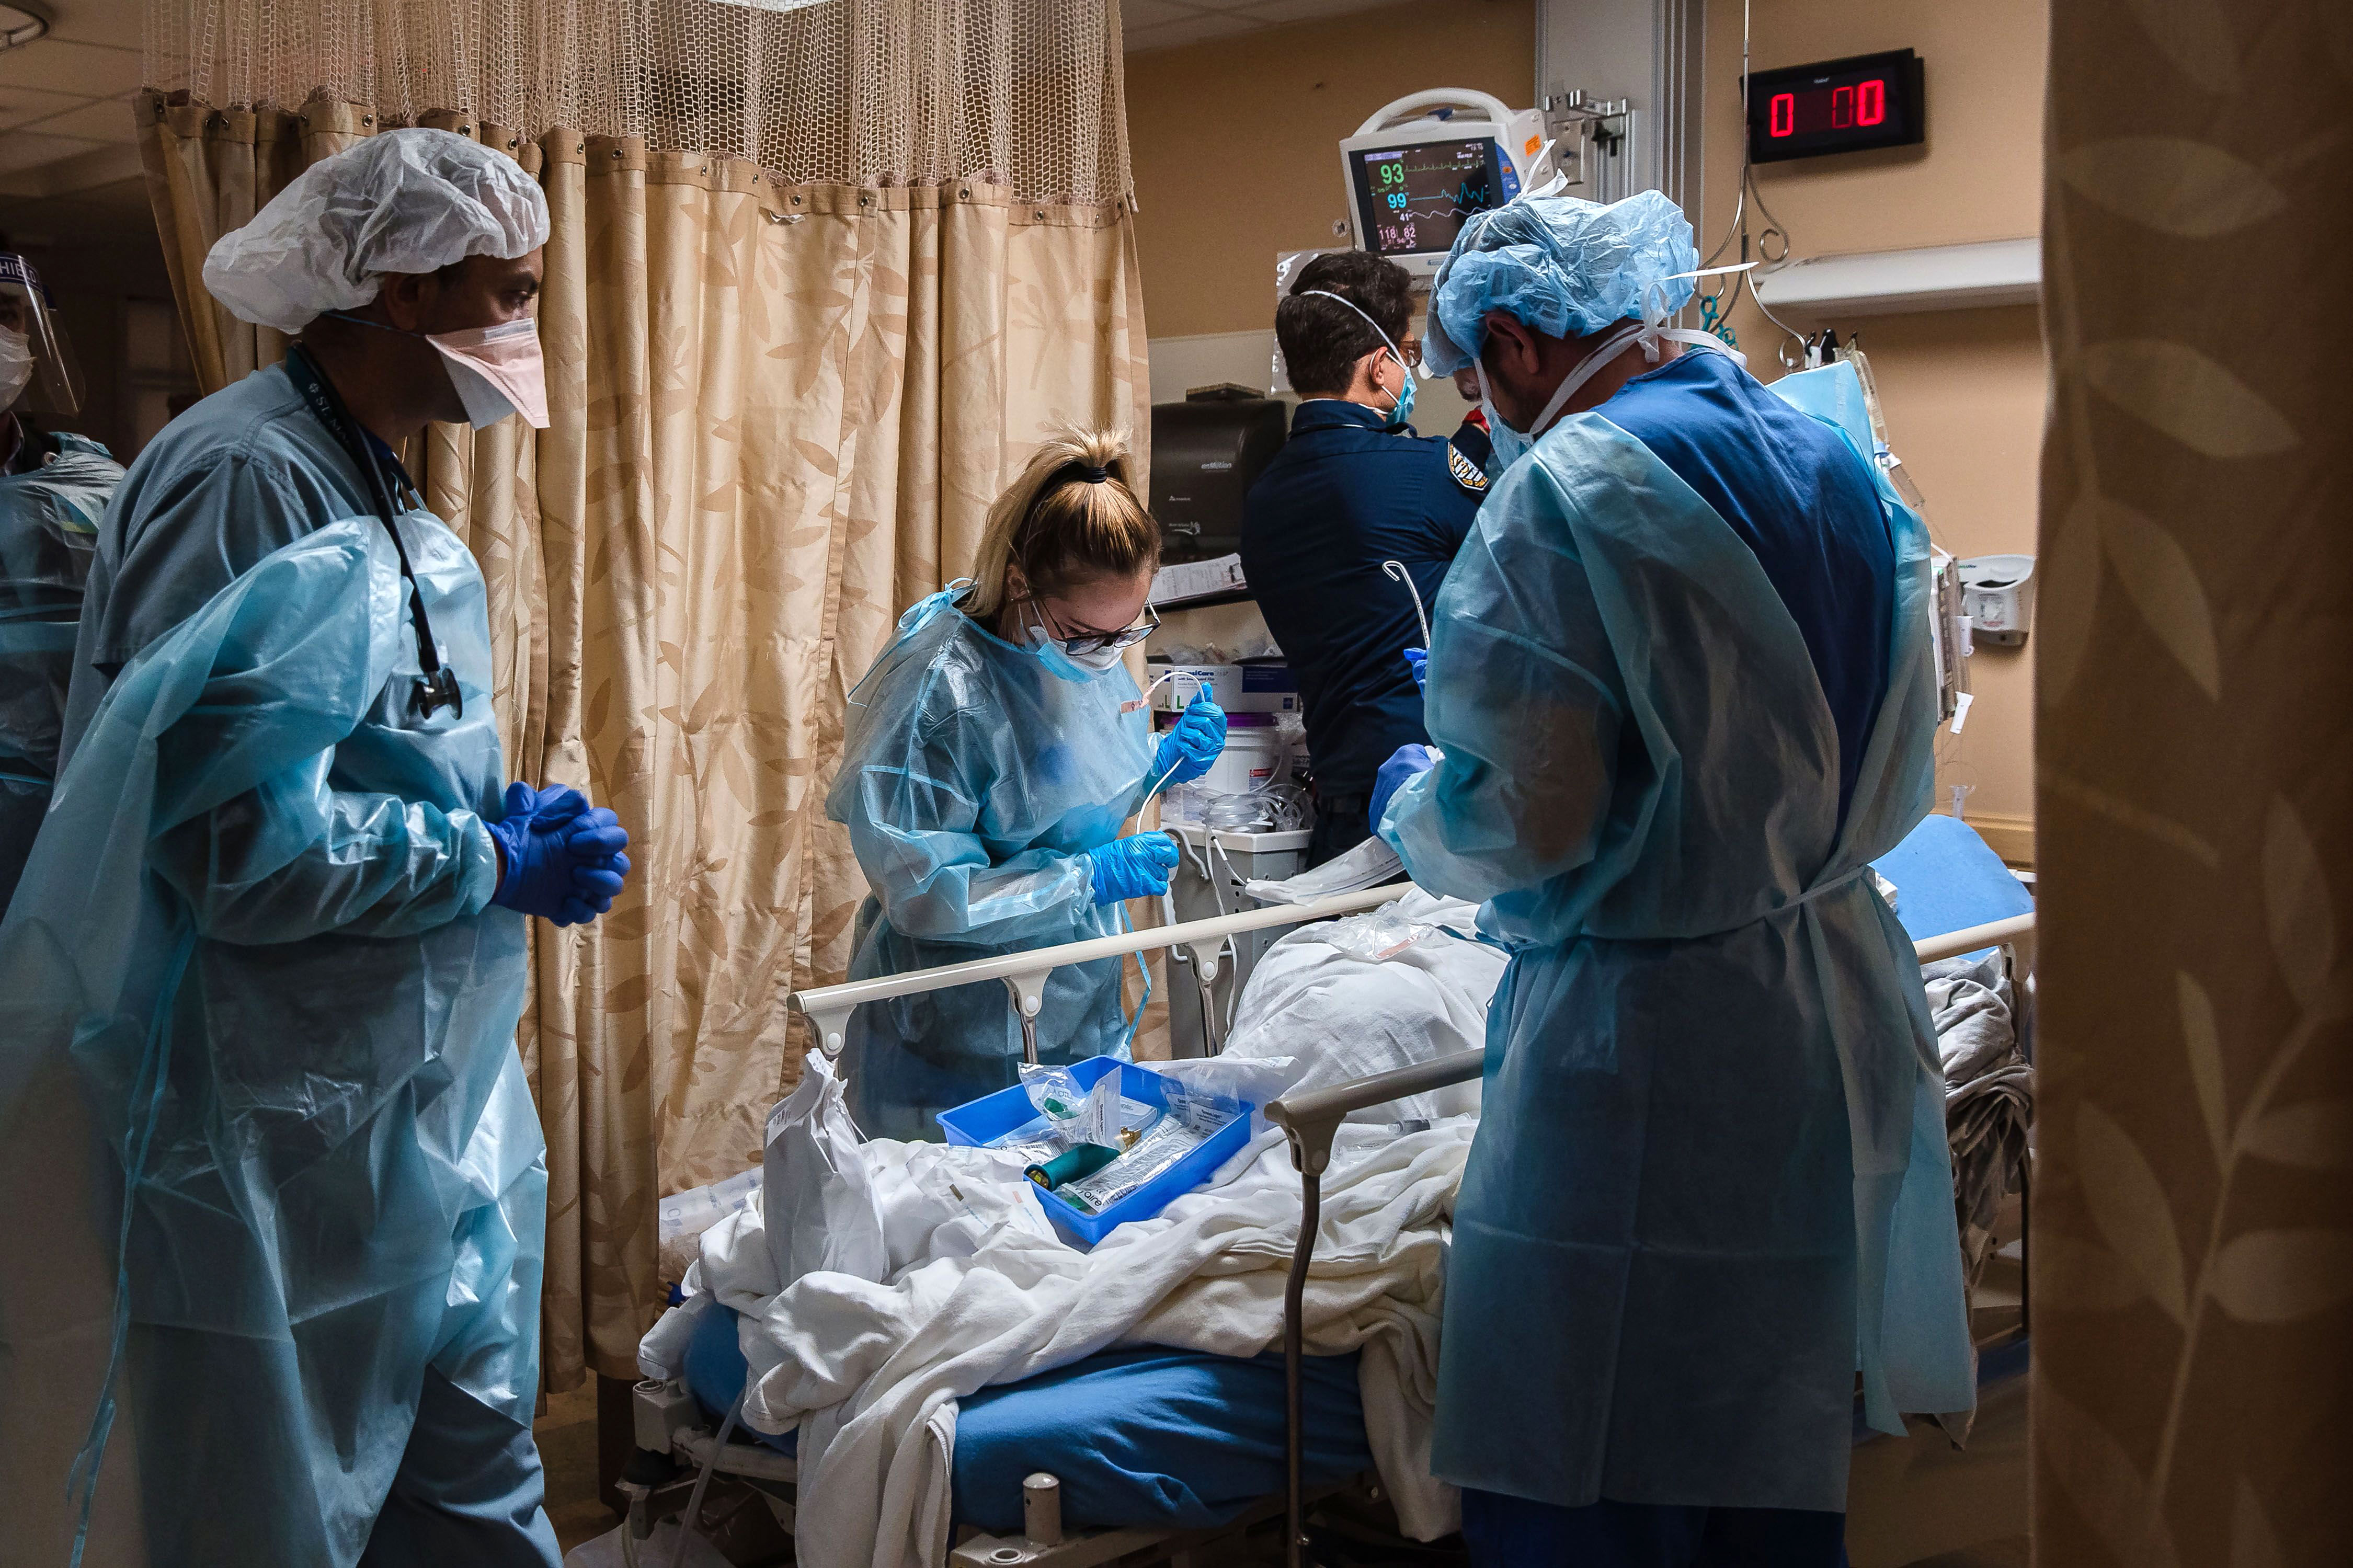 Health care workers tend to a patient with Covid-19 who is having difficulty breathing at Providence St. Mary Medical Center in Apple Valley, California, on January 11.